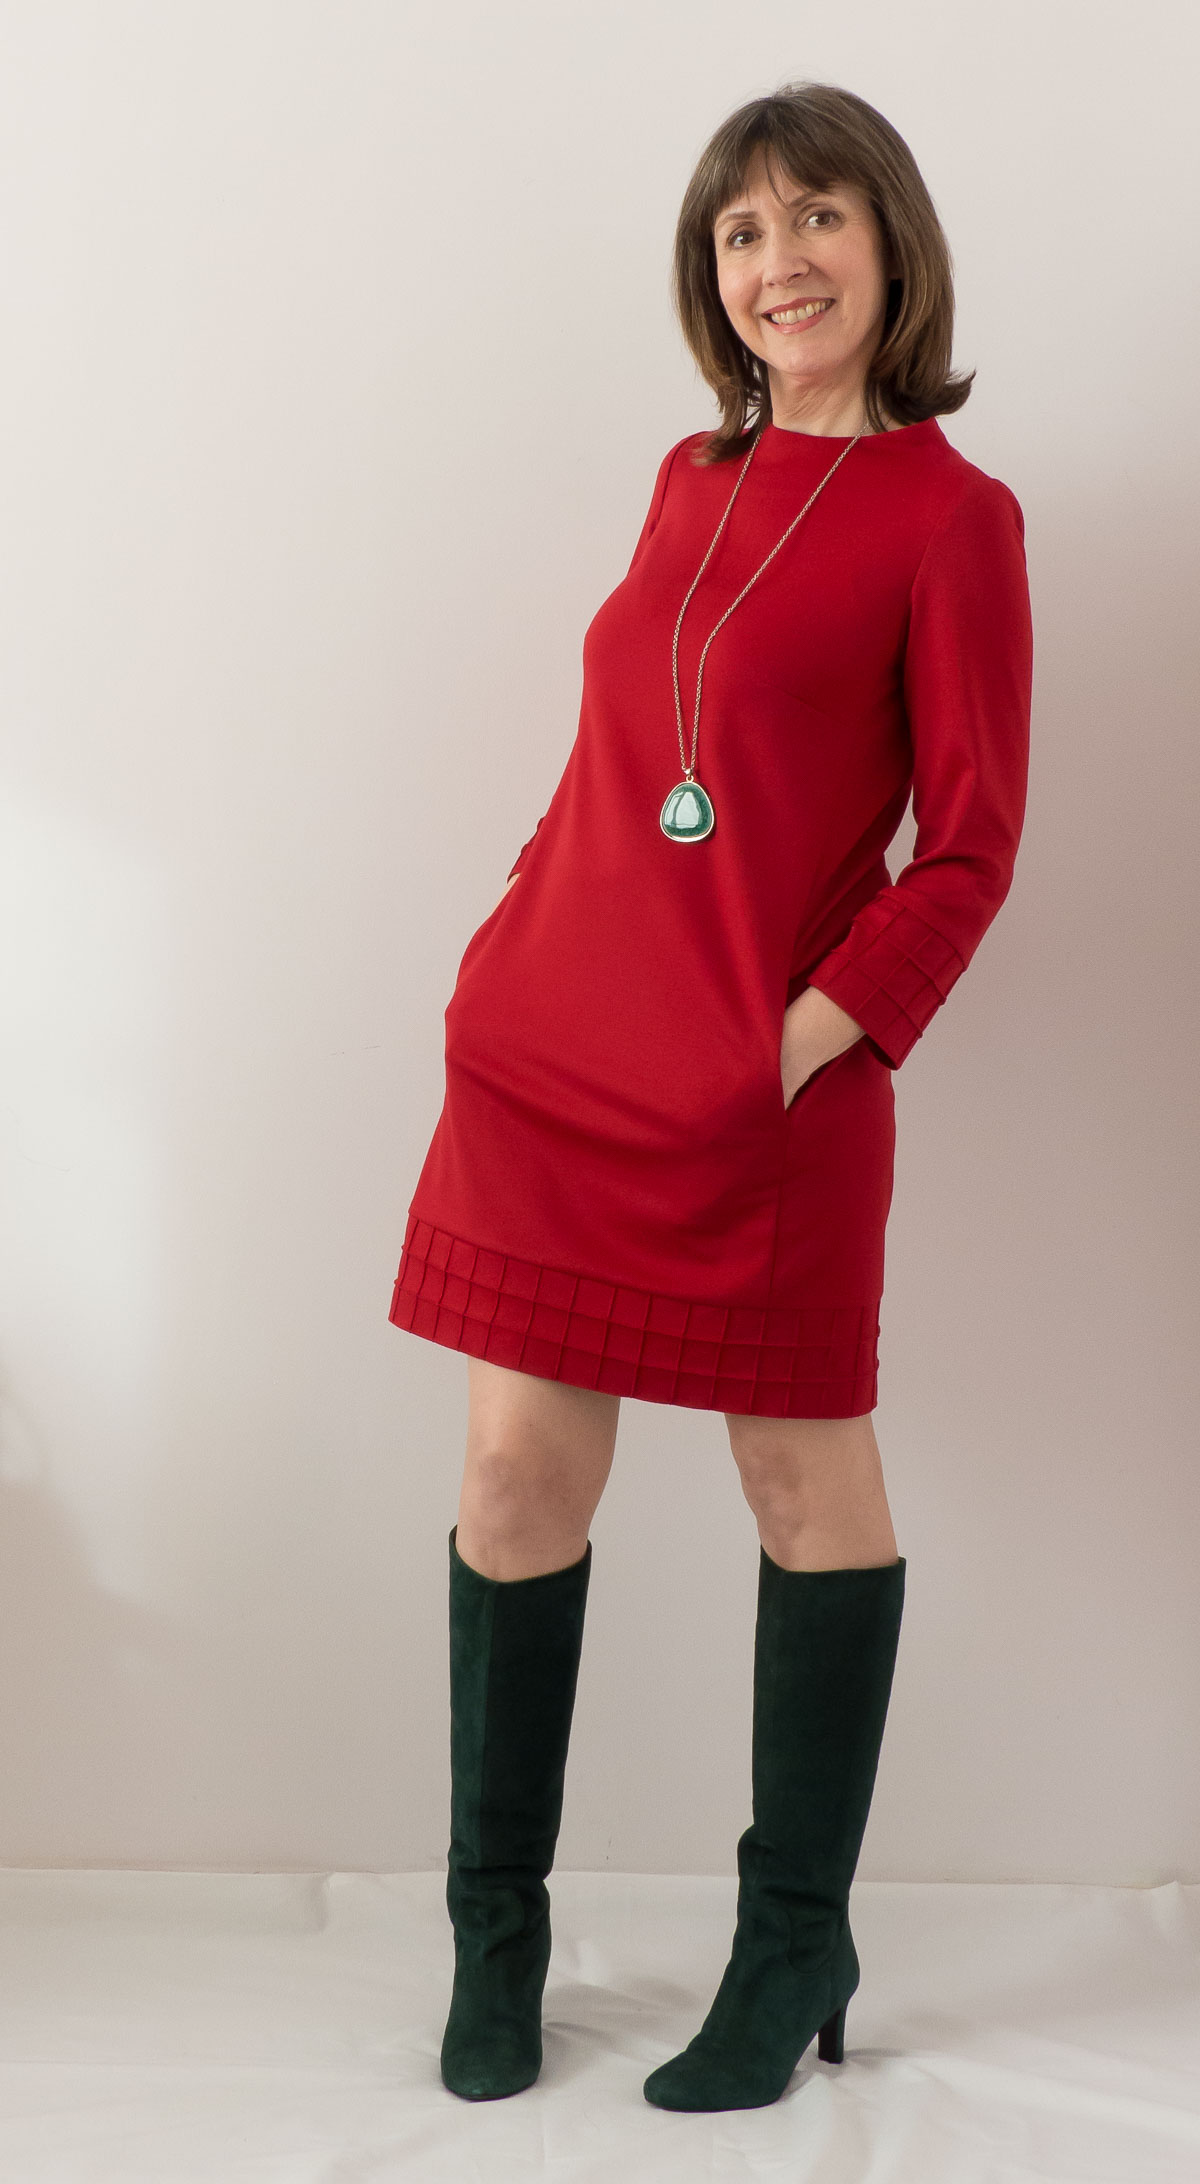 Sweater Shift Dress With a 60's Style